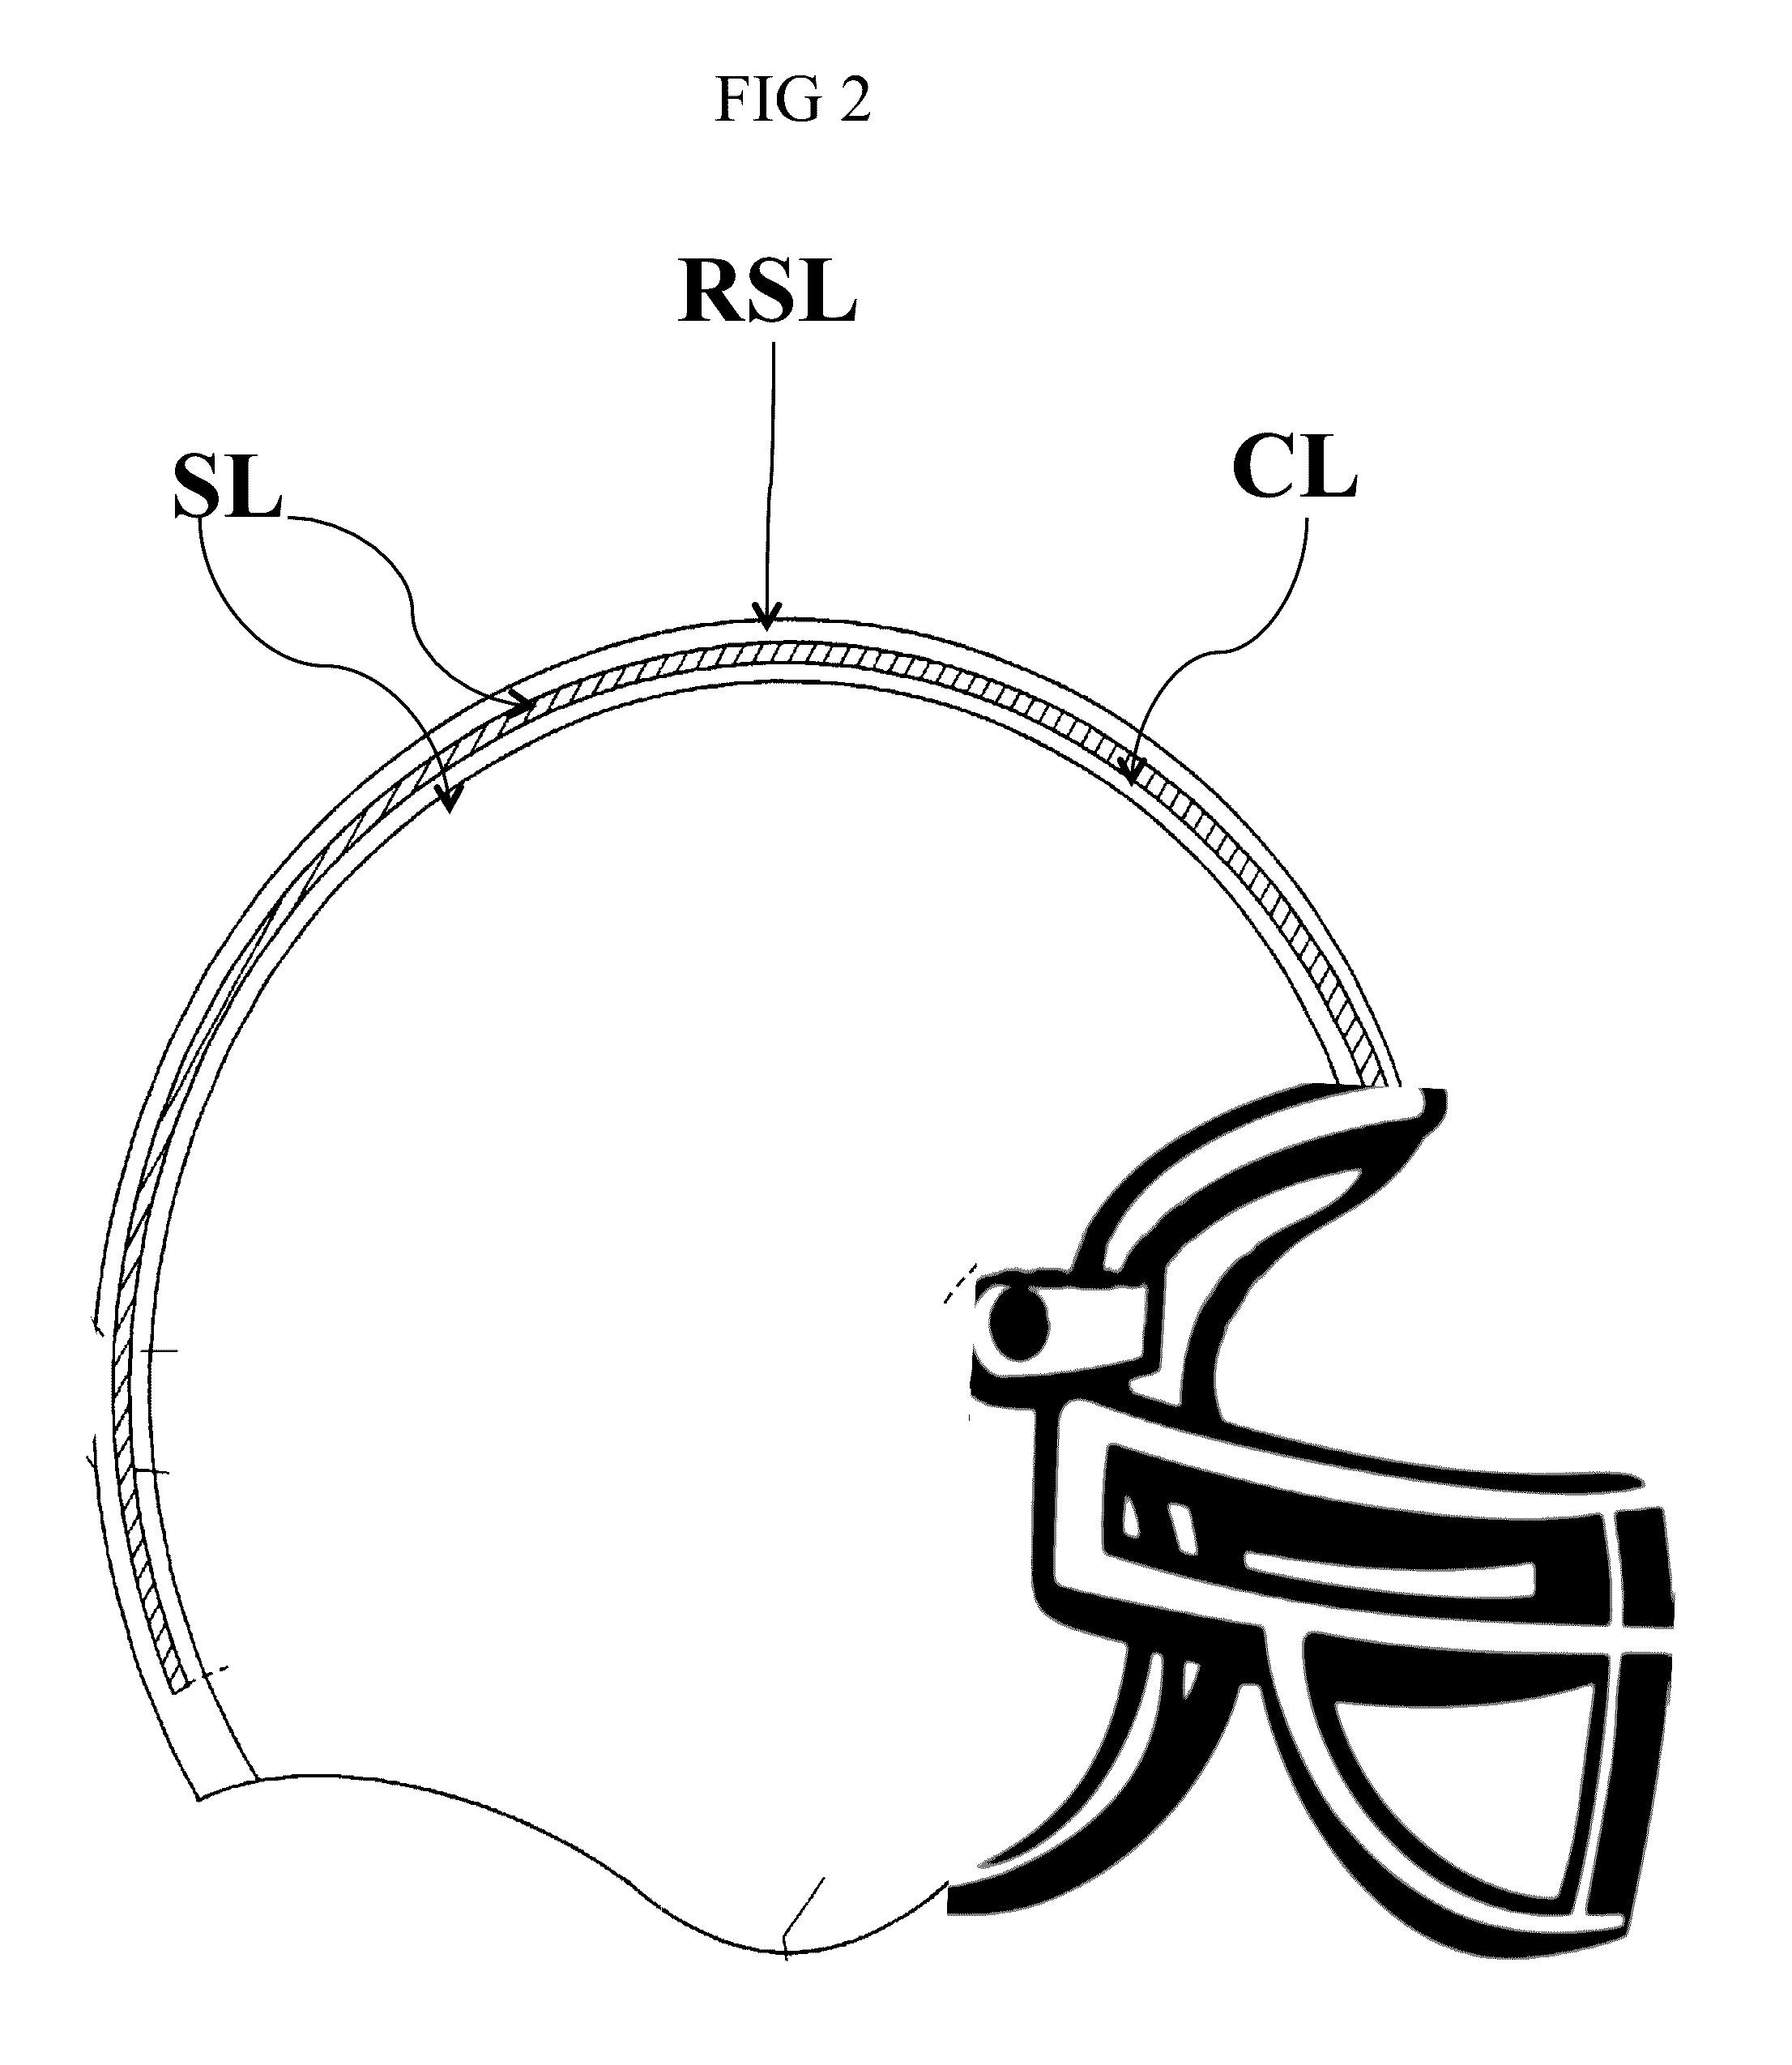 Composite devices and methods for providing protection against traumatic tissue injury